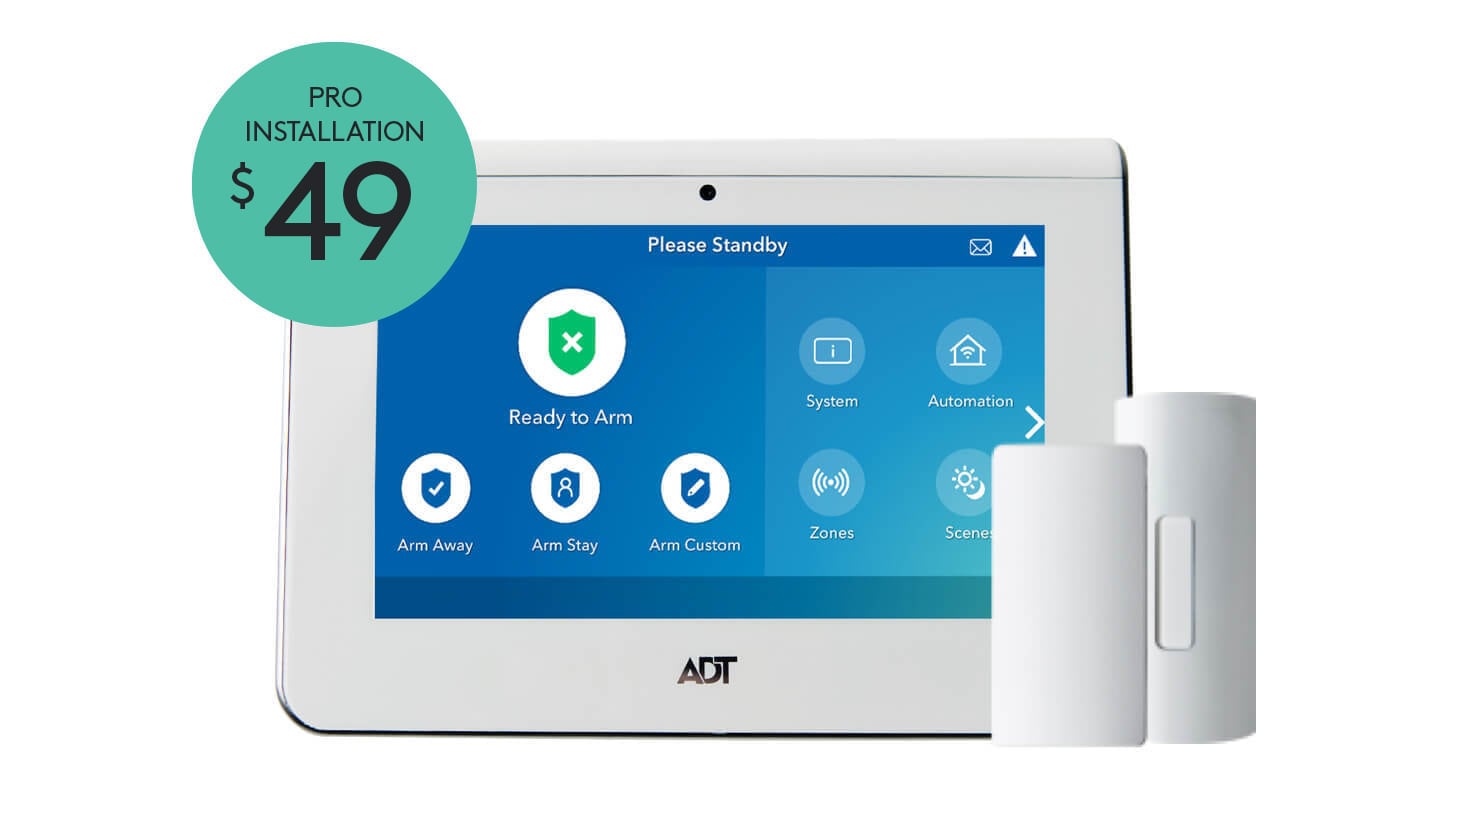 ADT intrusion detection package professionally installed for $49